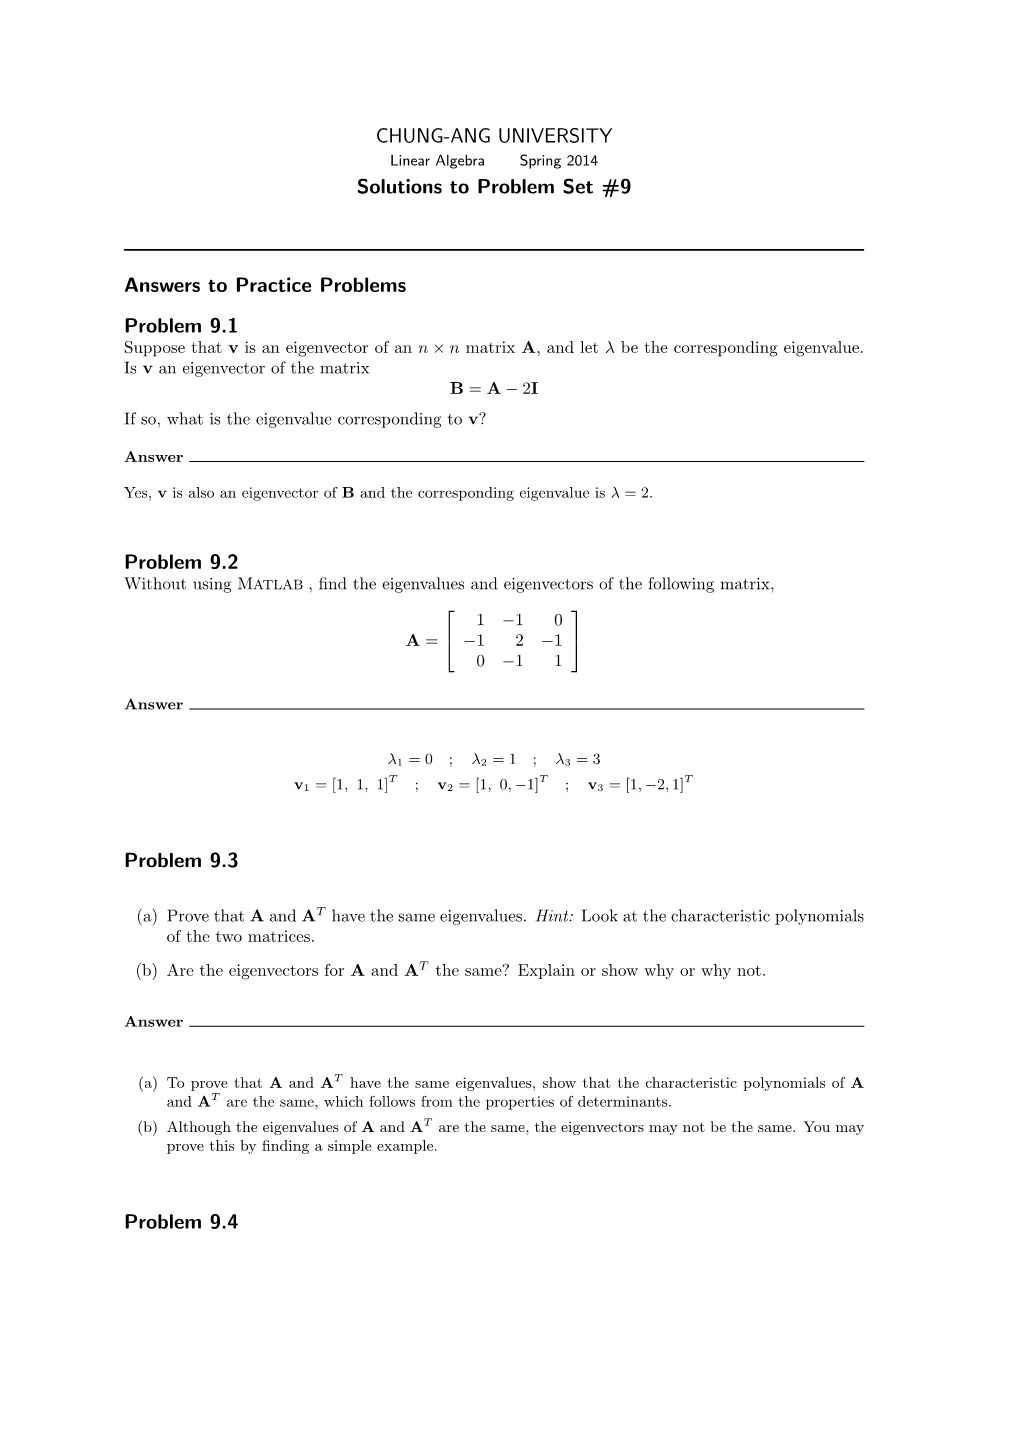 CHUNG-ANG UNIVERSITY Solutions to Problem Set #9 Answers To